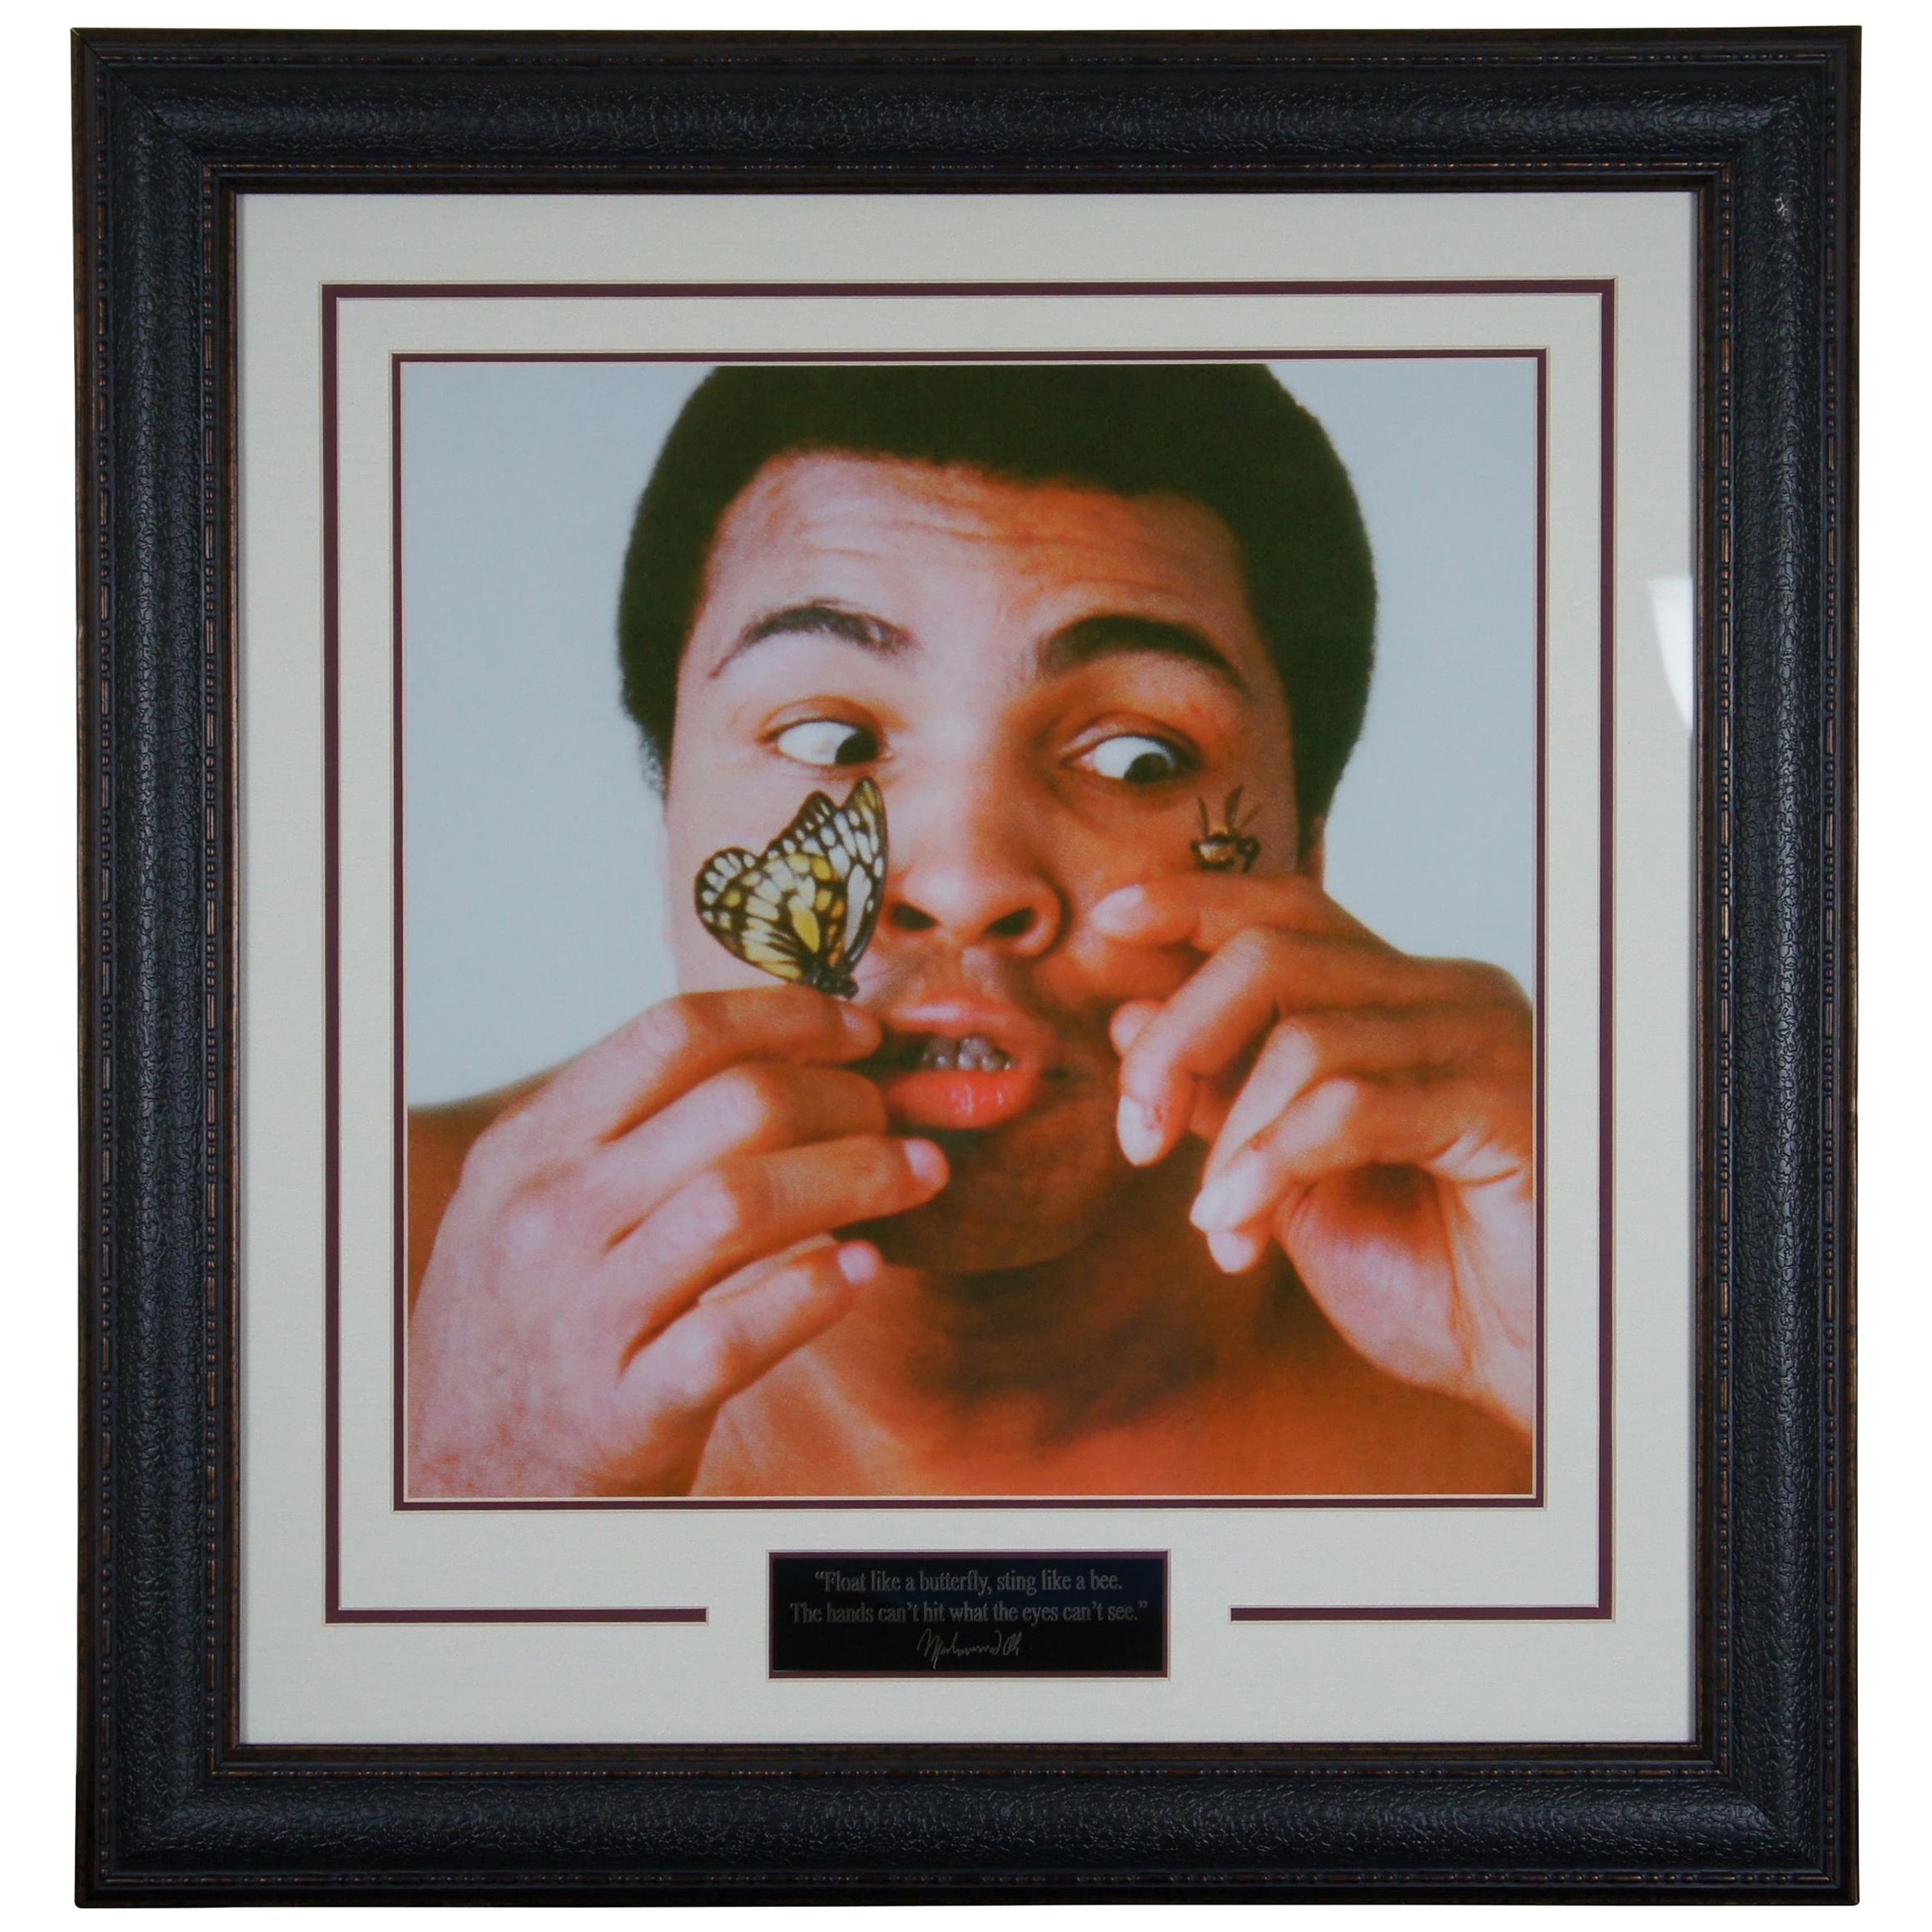 1970s Muhammad Ali Portrait Photo Butterfly Bee Framed Print and Plaque